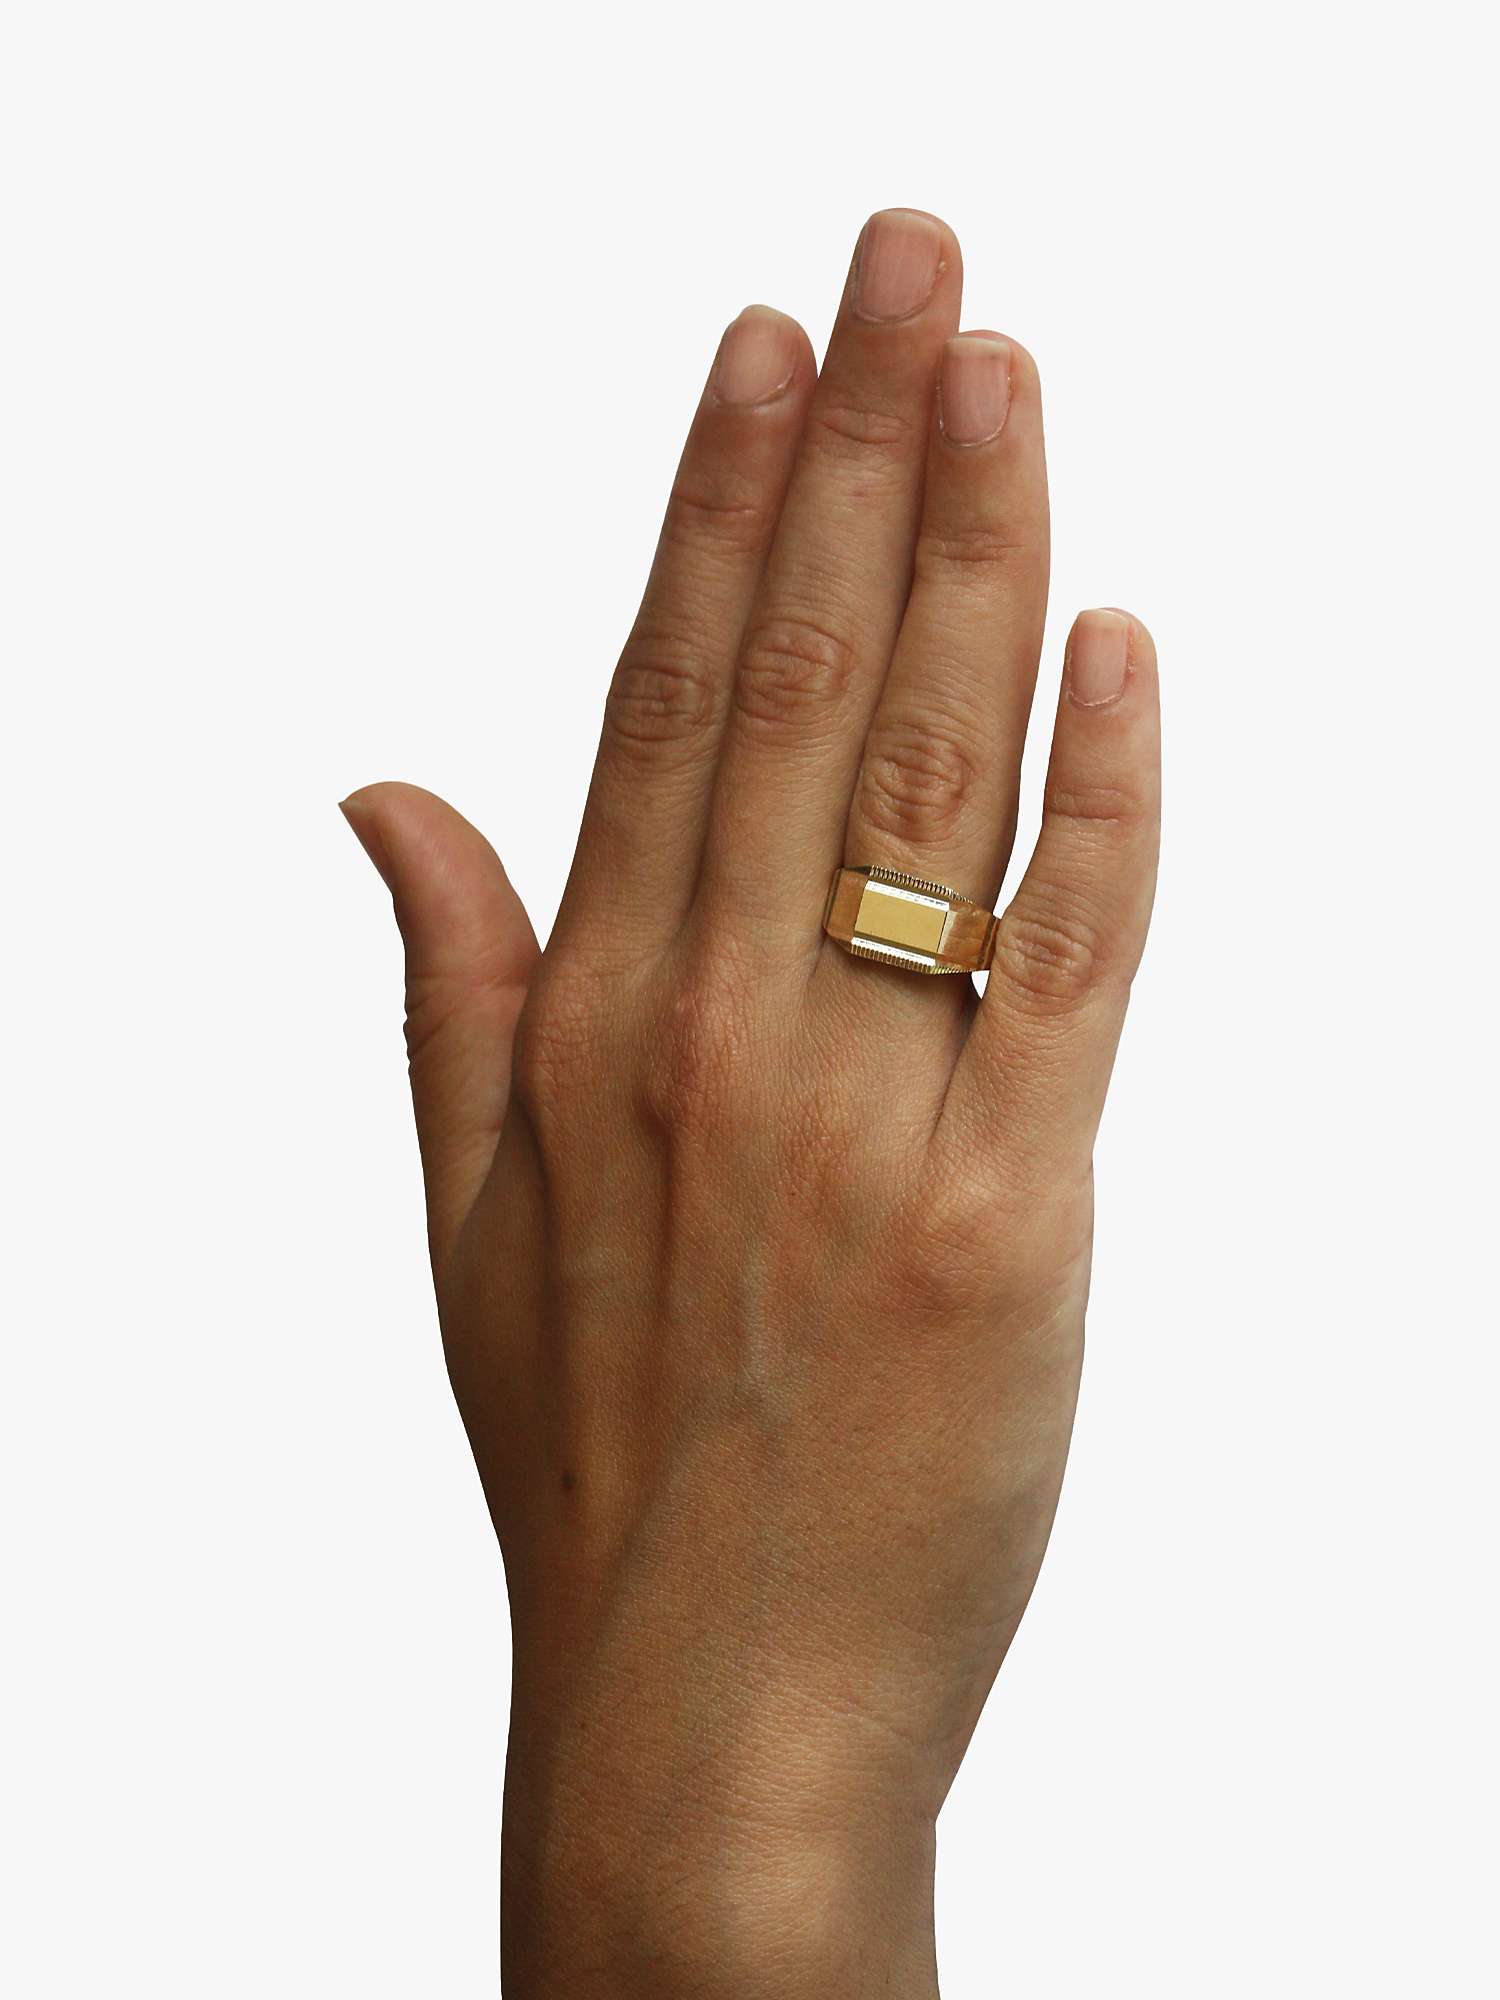 Buy VF Jewellery 9ct Yellow Gold Second Hand Cur Edge Signet Ring Online at johnlewis.com